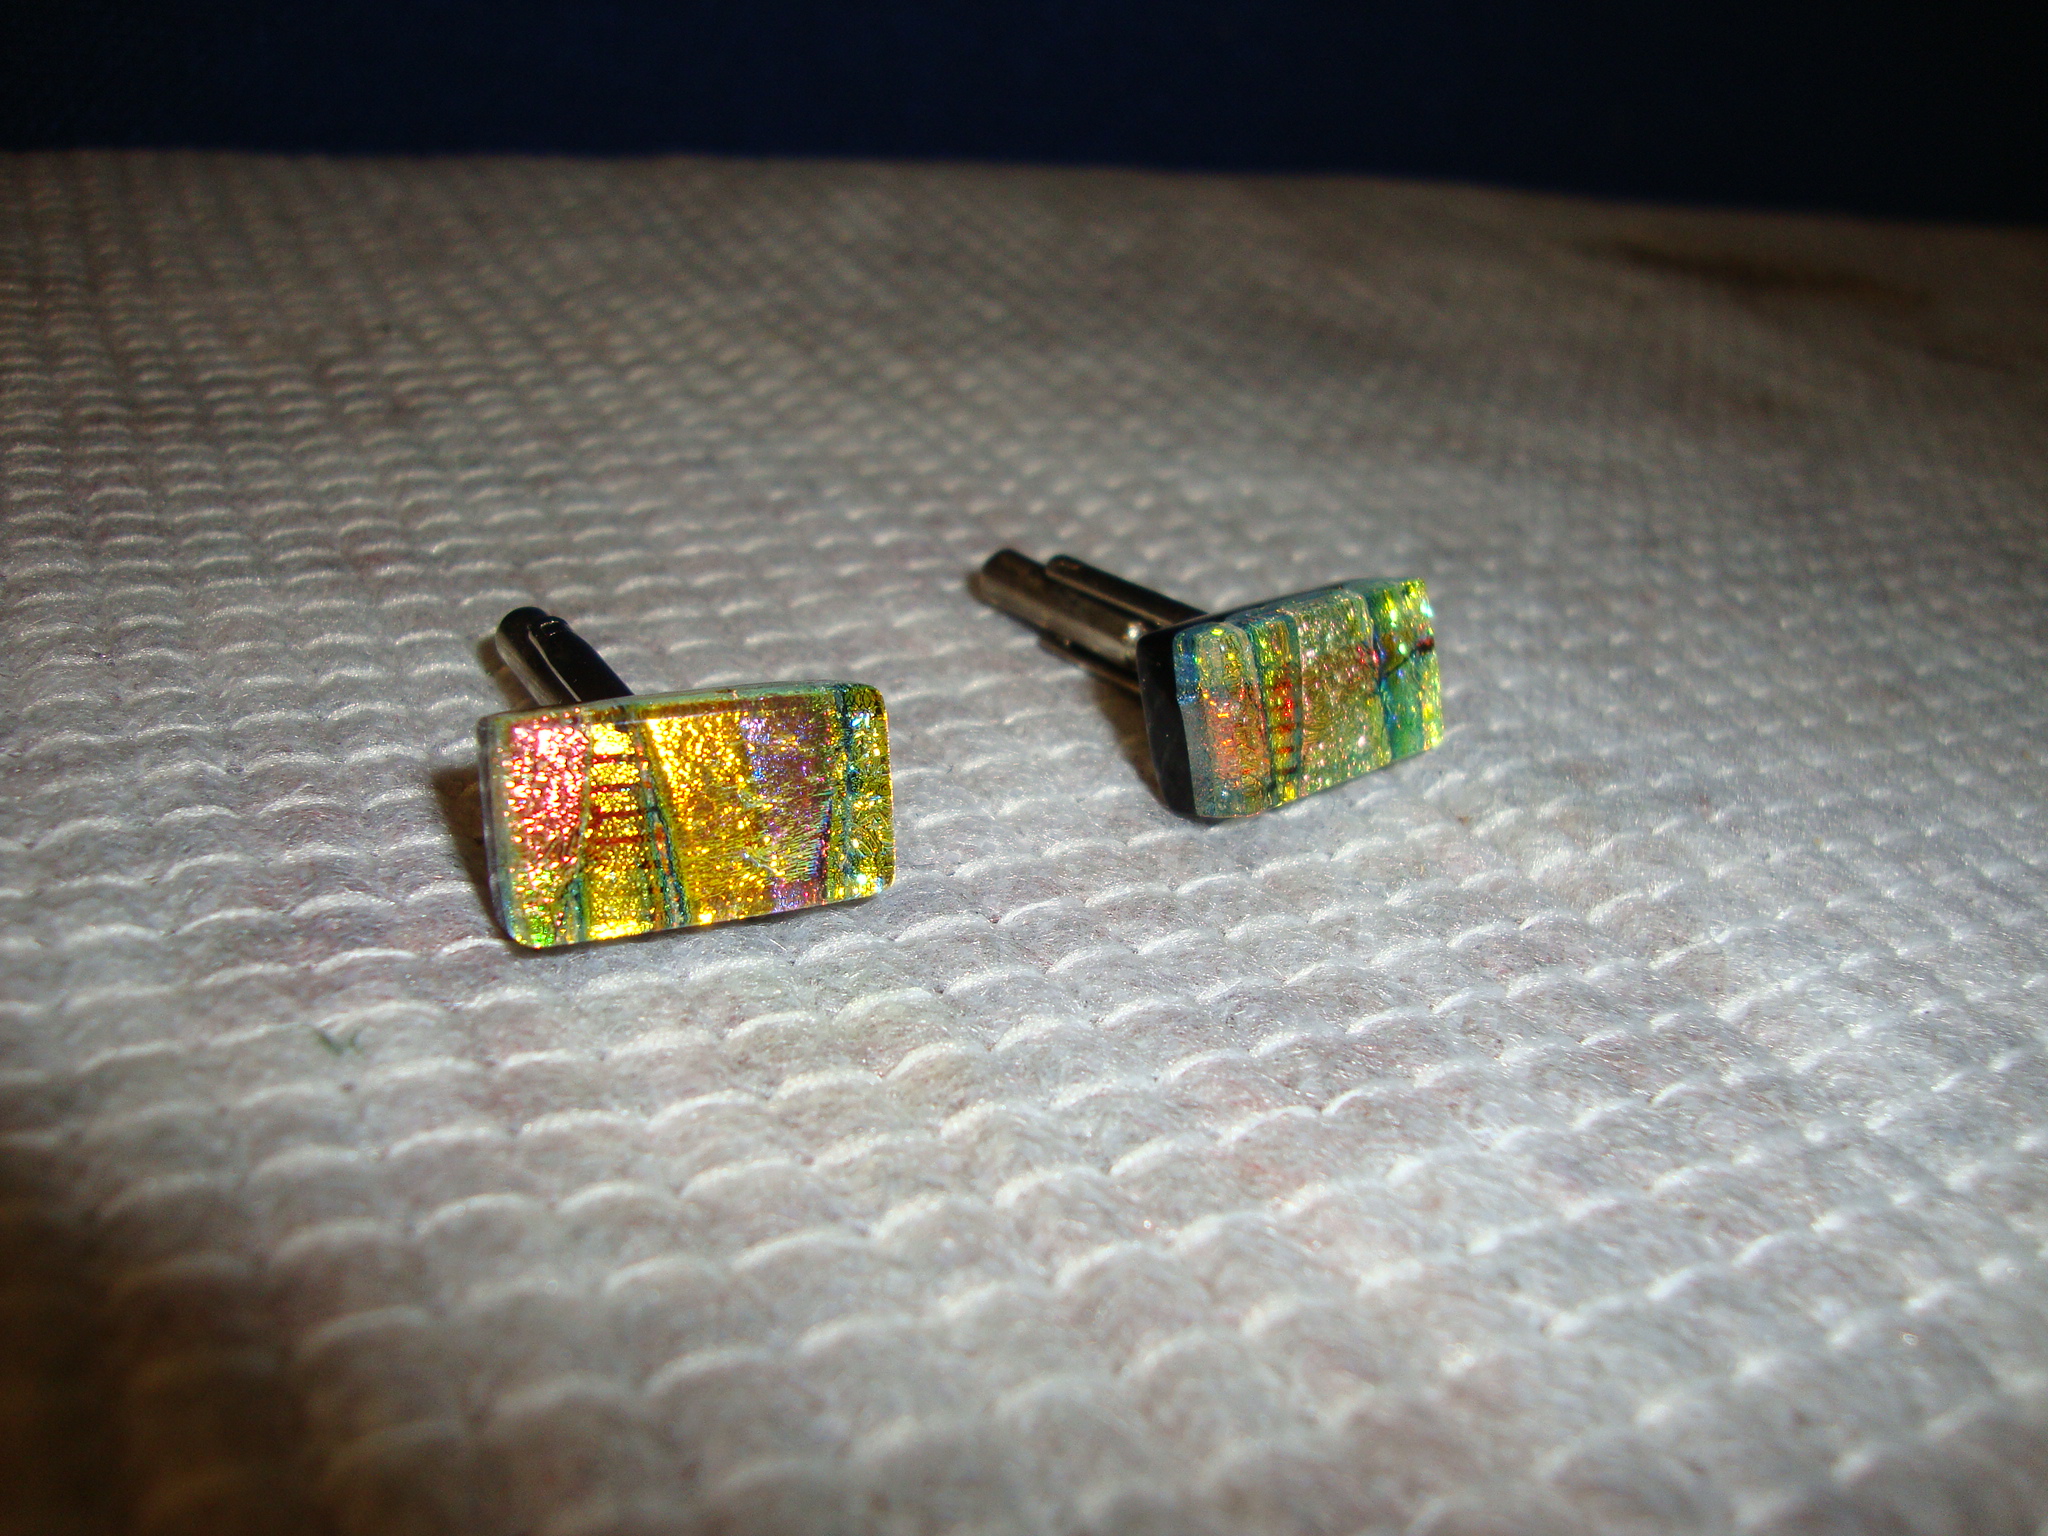 Pair of cufflinks understood to be handmade in glass - Image 2 of 4